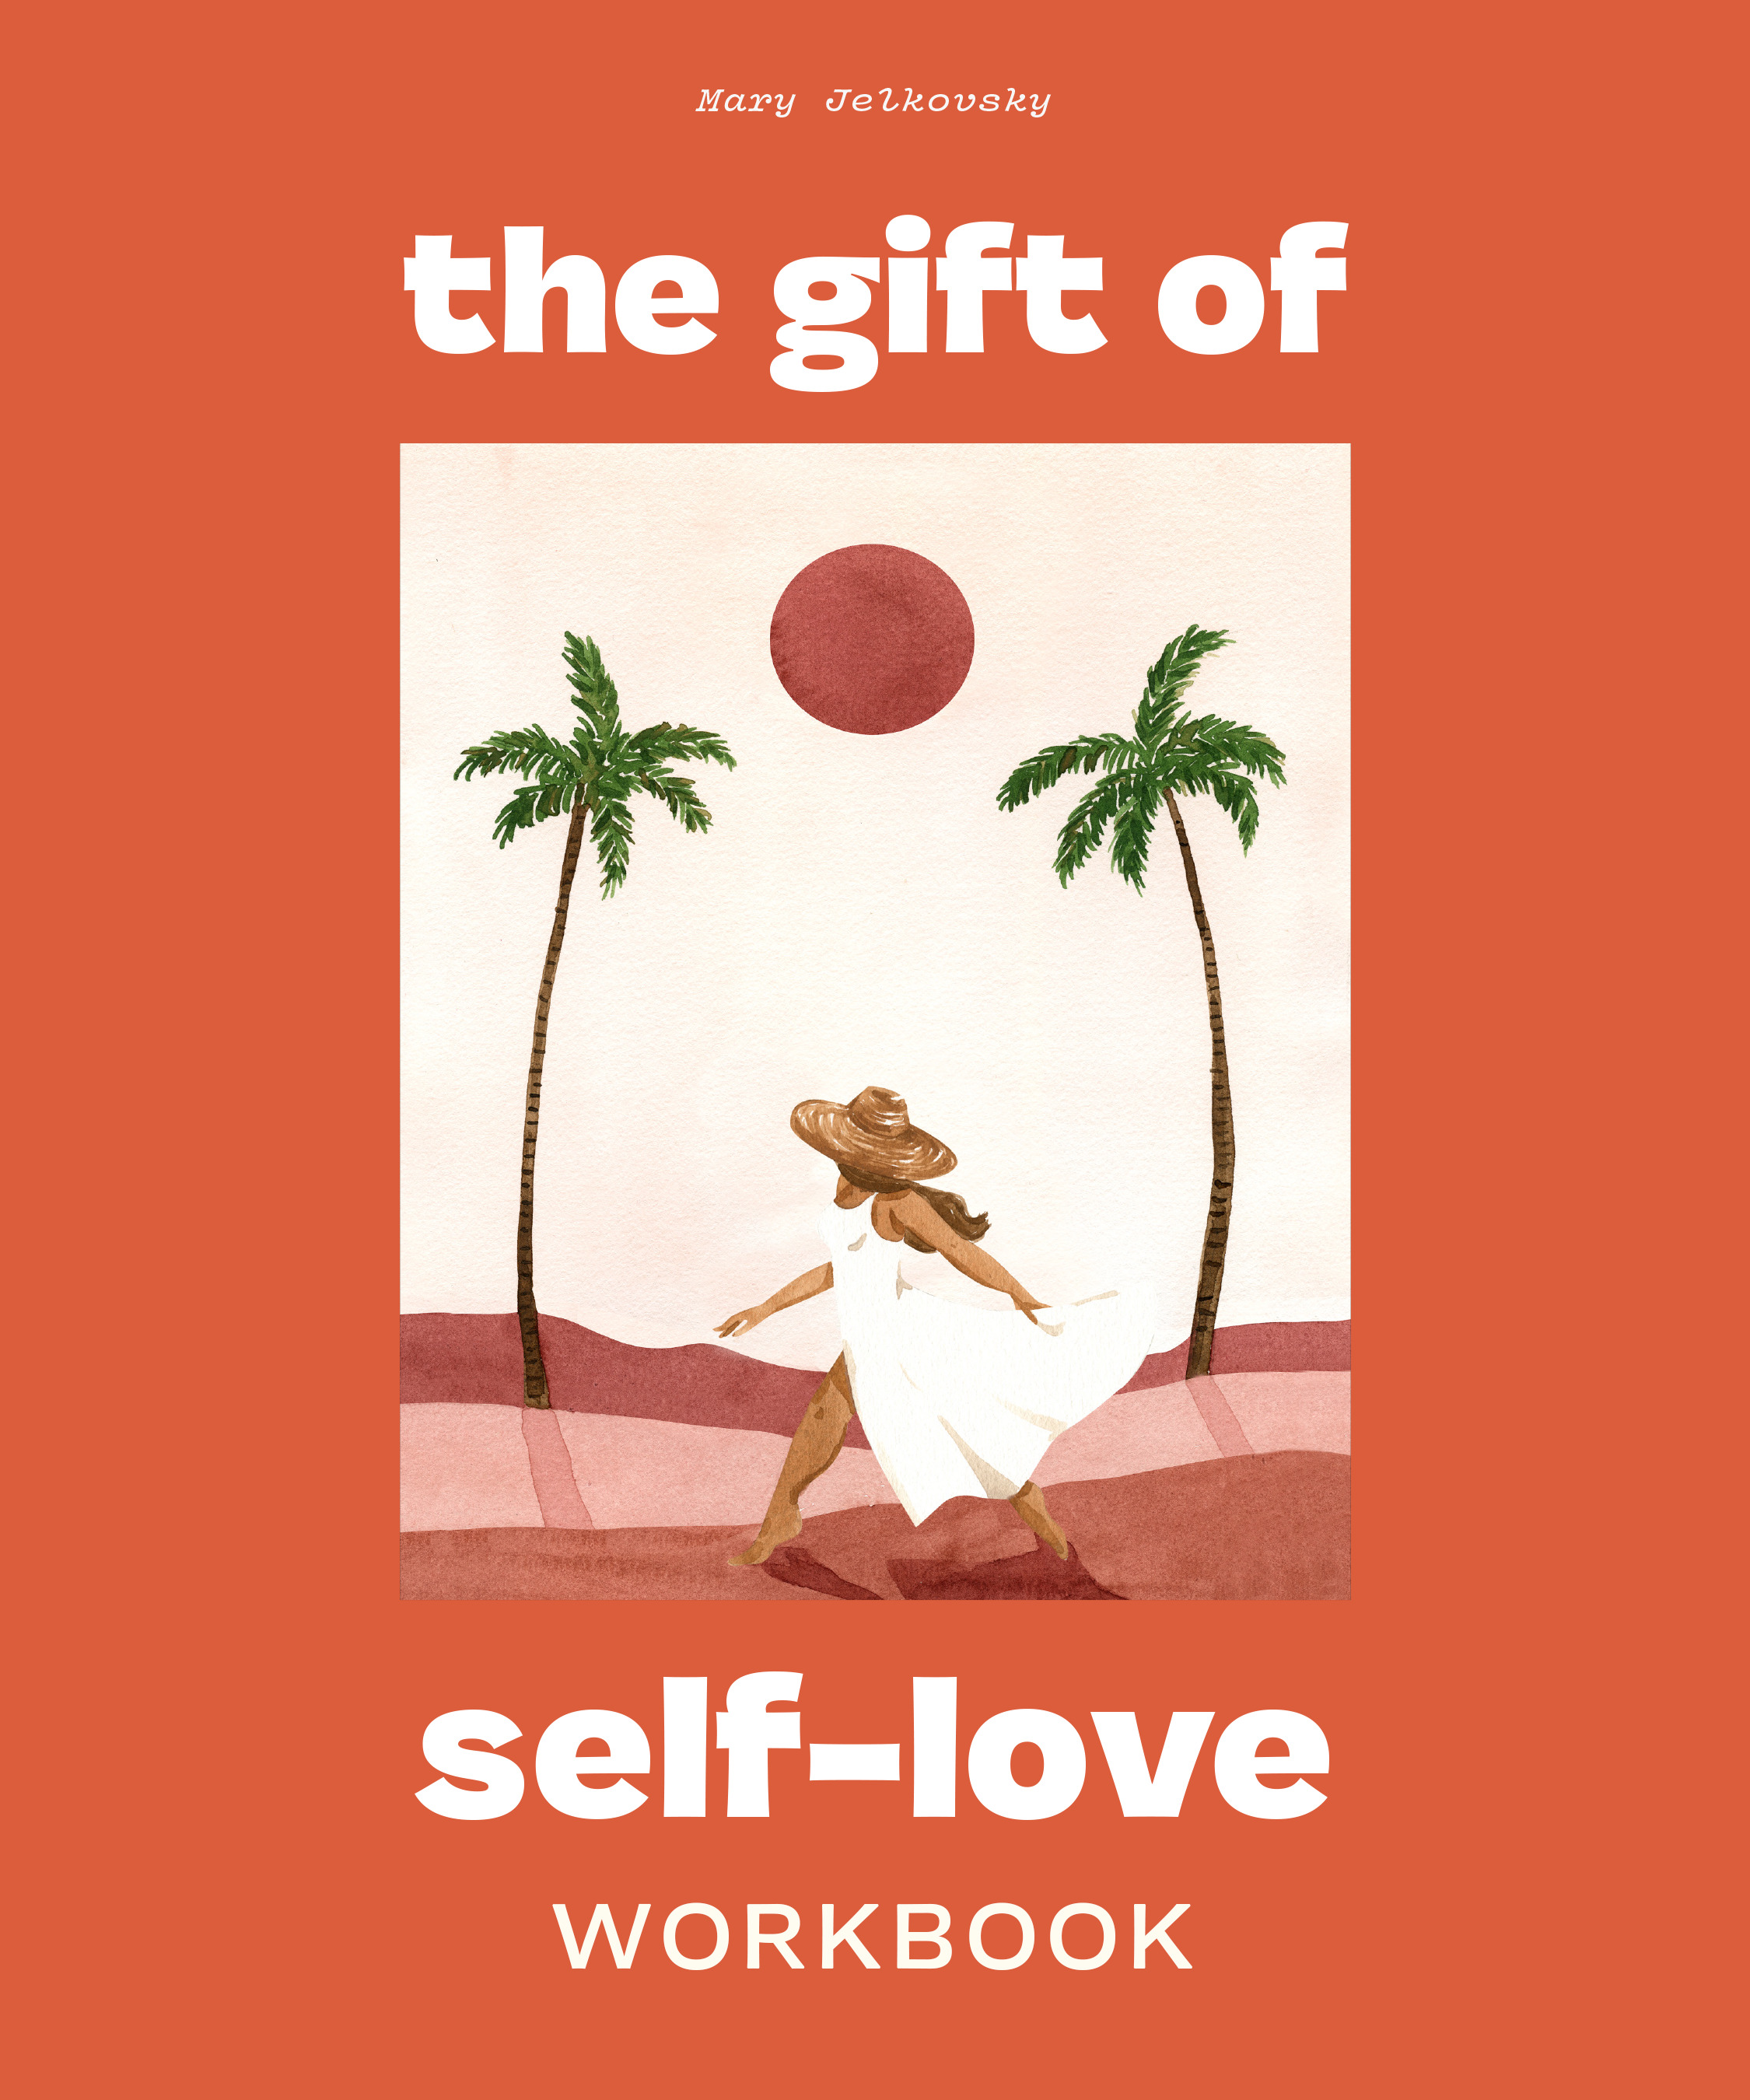 The Gift of Self-Love : A Workbook to Help You Build Confidence, Recognize Your Worth, and Learn to Finally Love Yourself | Jelkovsky, Mary